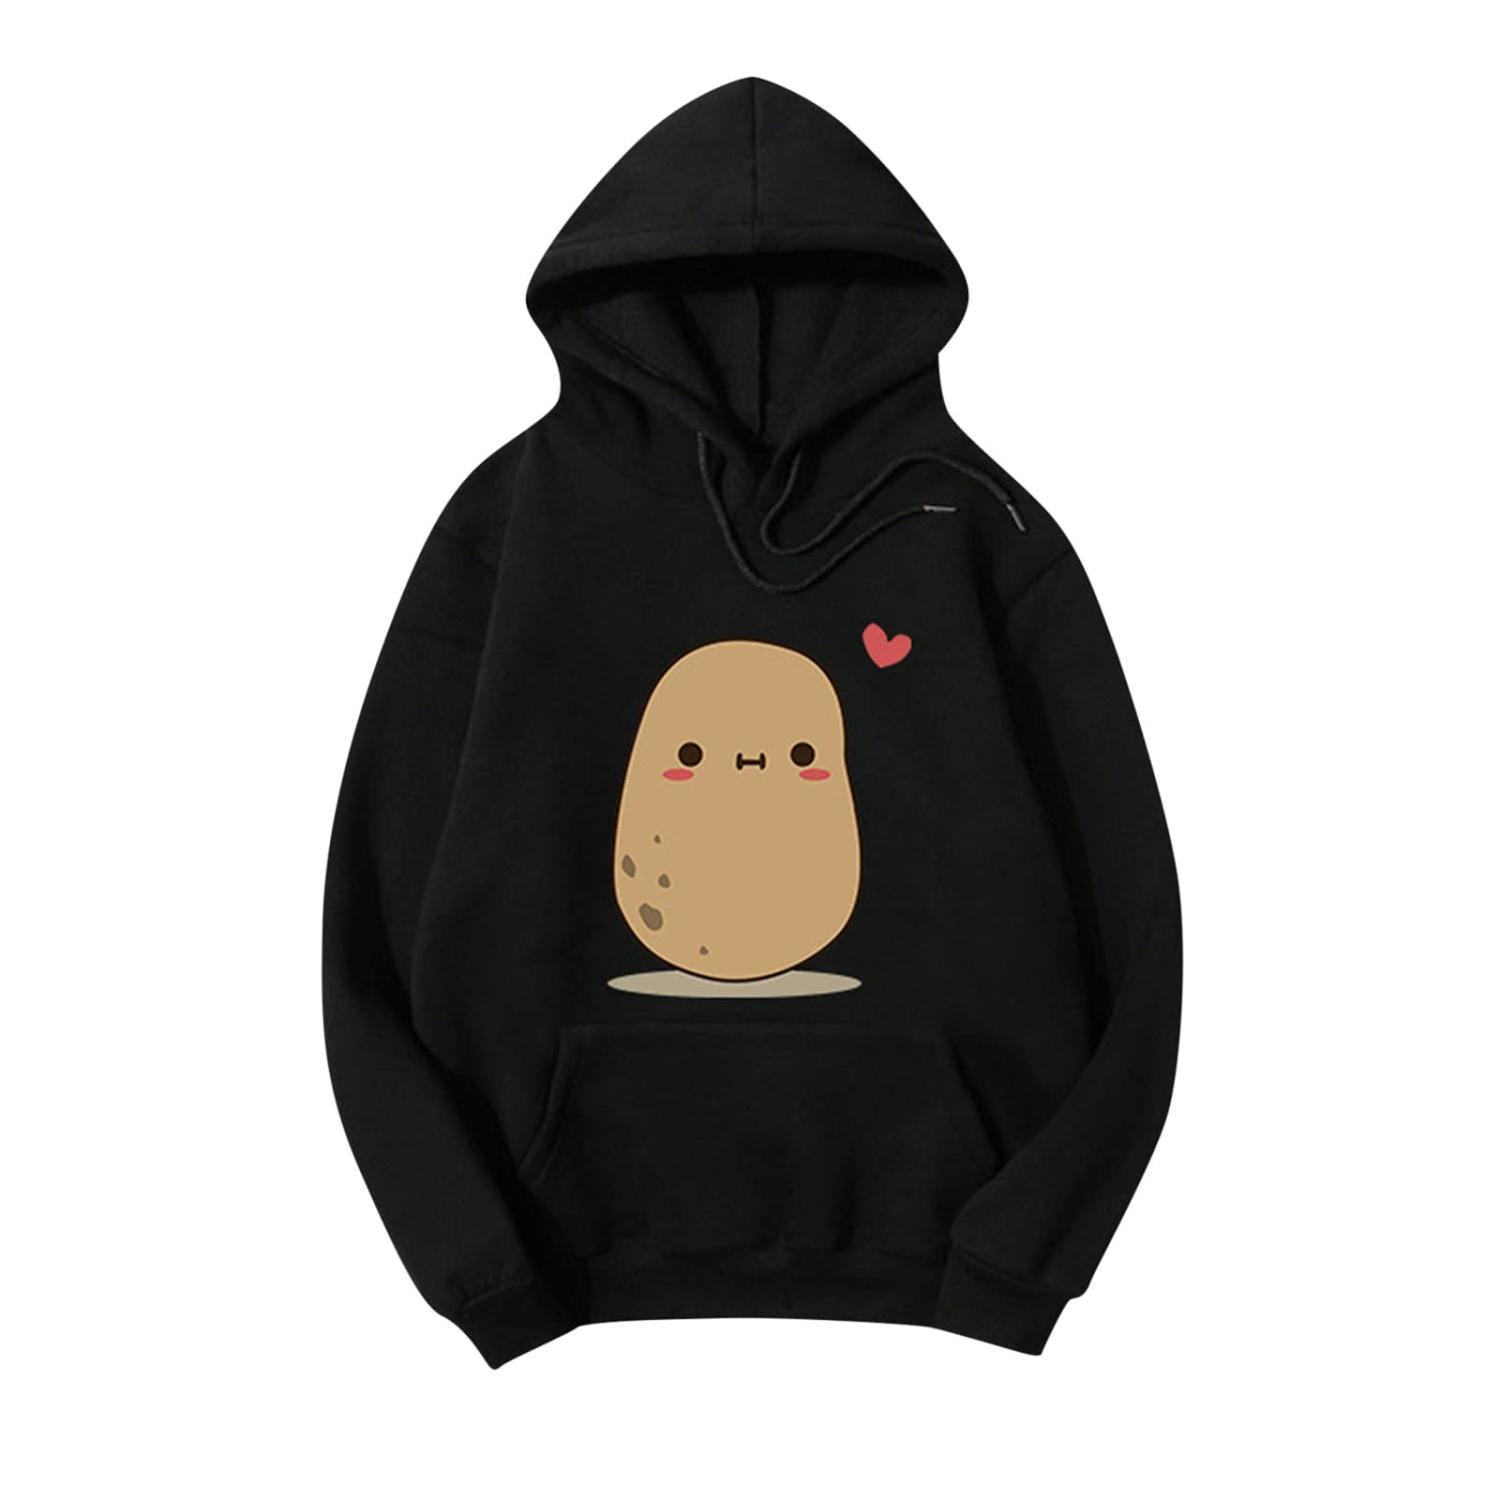 IFOTIME Cute Hoodies for Teen Girls Pullover Potato Heart Printed Solid  Color Hooded Sweatshirt Sport Ligthweight A11 Black Small